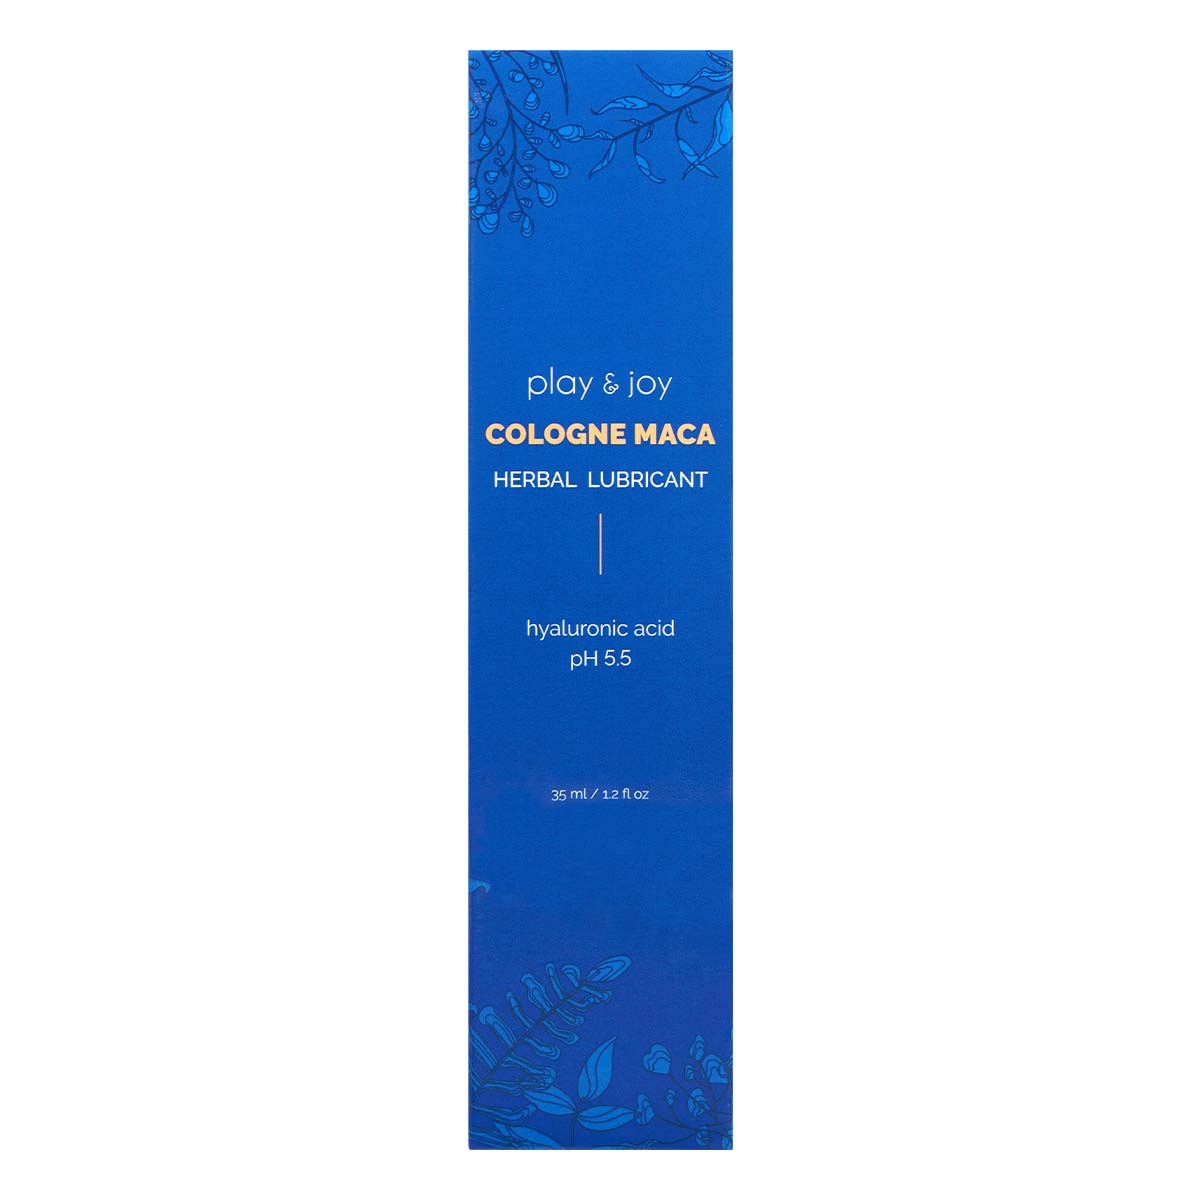 PLAY & JOY Cologne Maca extra hot 35ml Water-based Lubricant-p_2